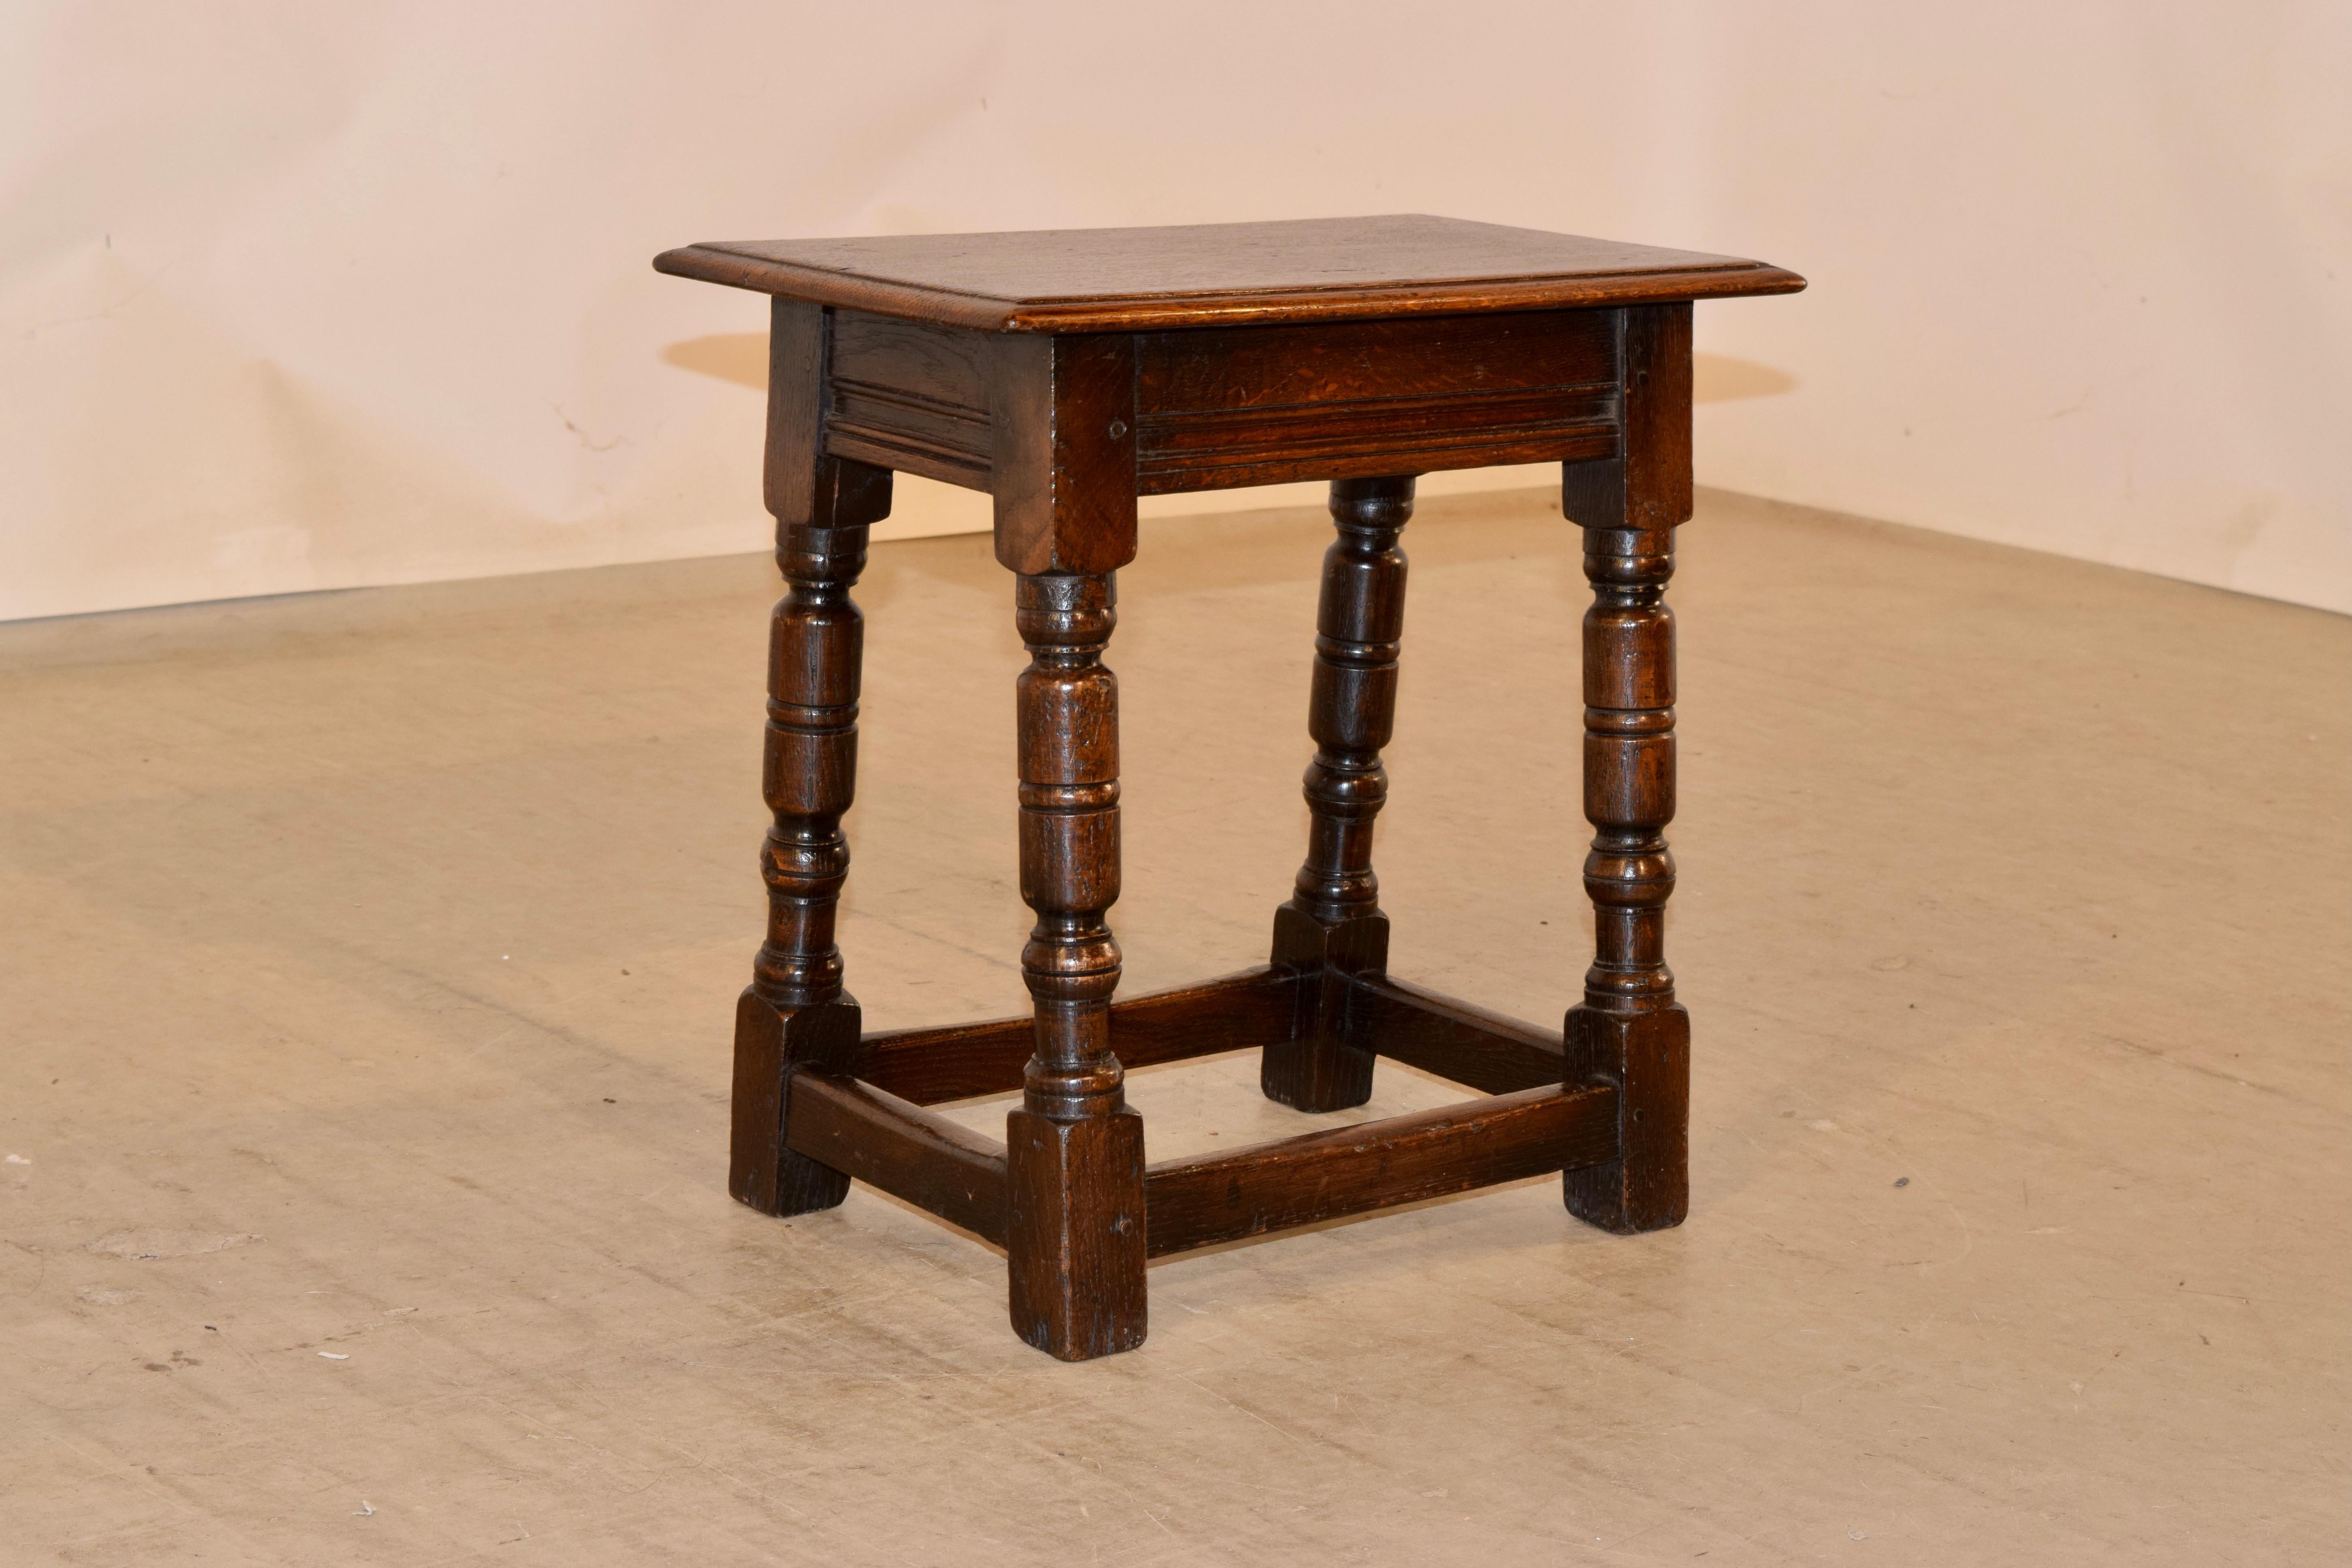 Early 19th century oak joint stool from England with a beveled edge around the top, following down to a simple apron with molded banding. The stool is supported on hand turned splayed legs, joined by simple stretchers.